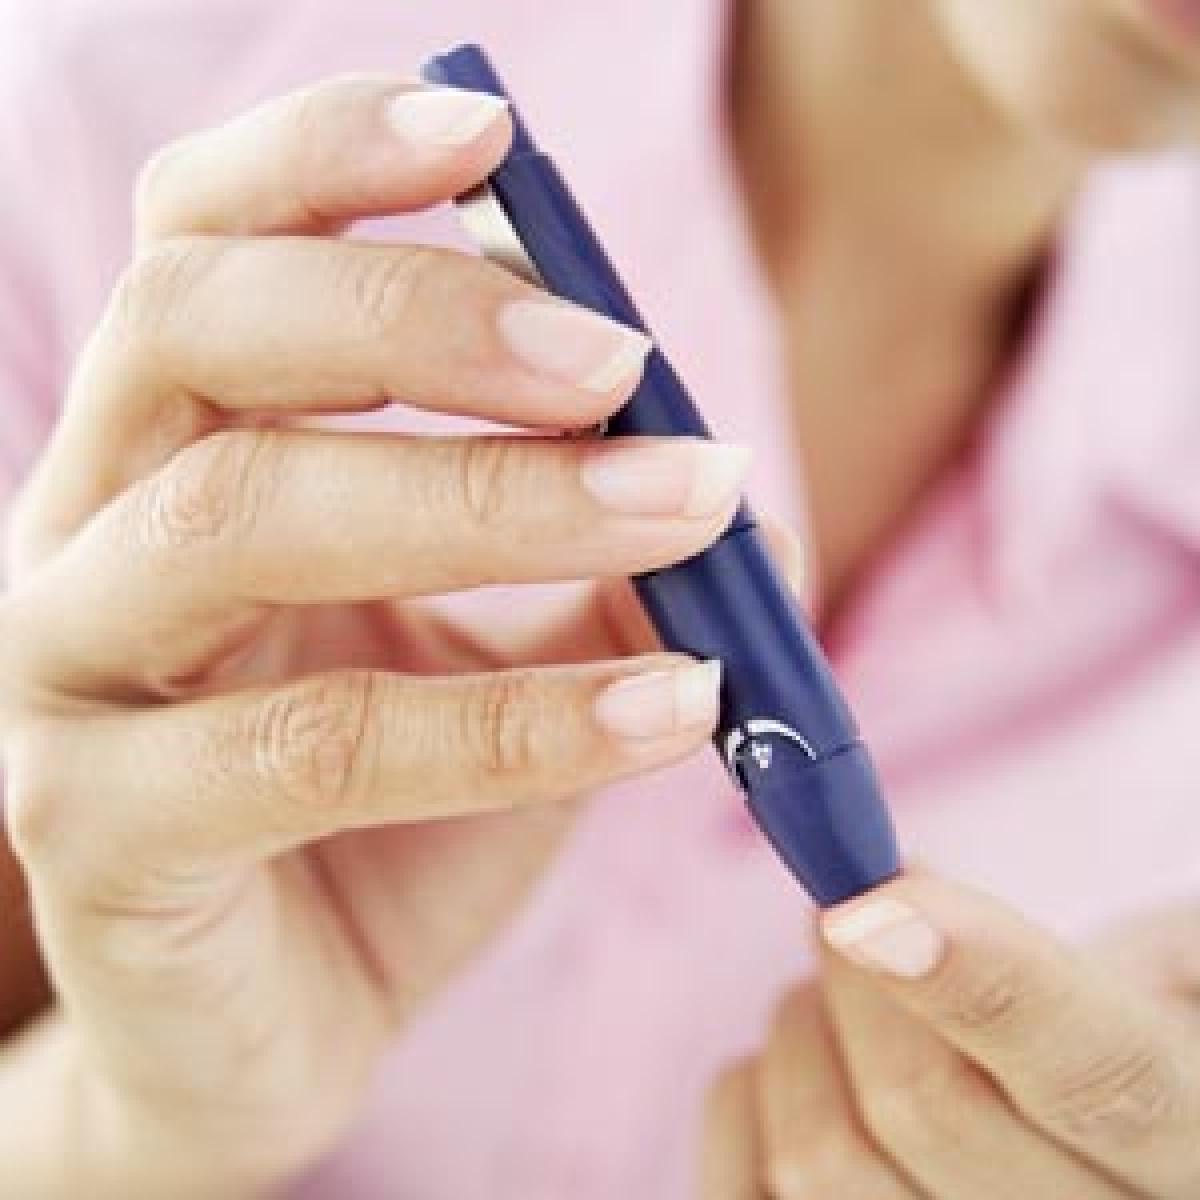 Early, late menopause may increase risk of diabetes